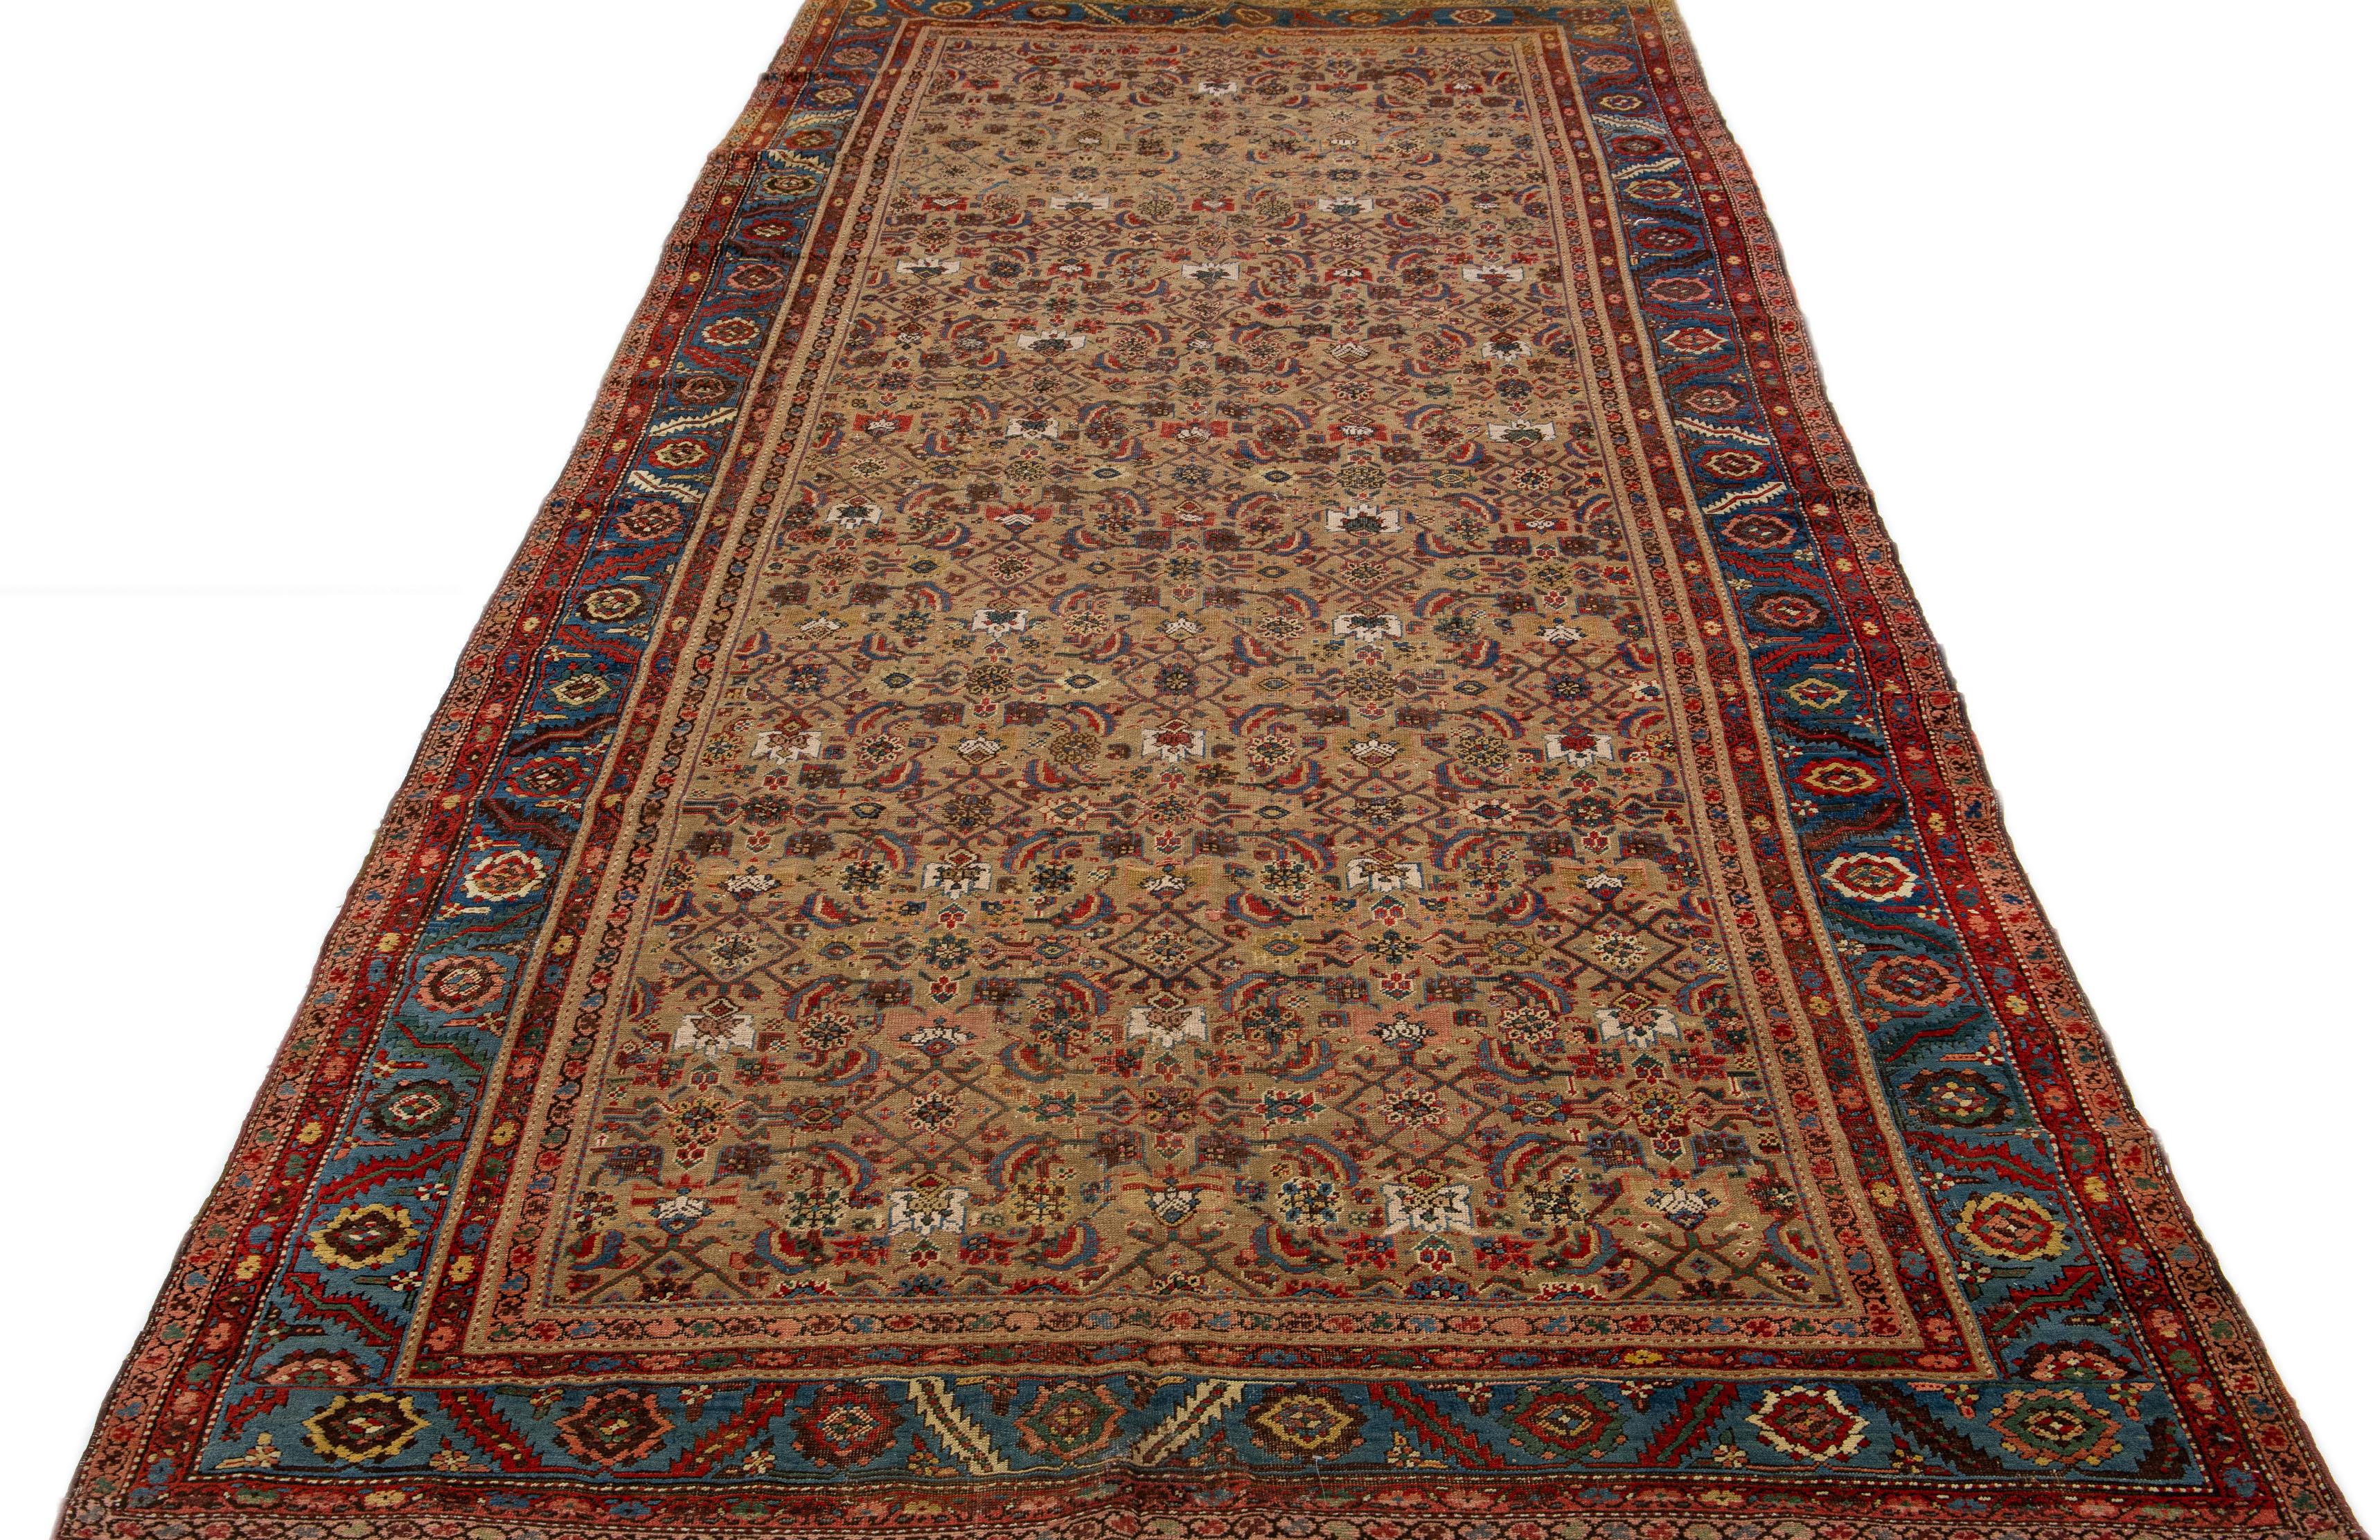 Beautiful antique Bakshaish hand-knotted wool rug with a brown color field. This piece has a blue frame and red accents on a gorgeous Classic all-over floral design.

This rug measures 7' x 16'9